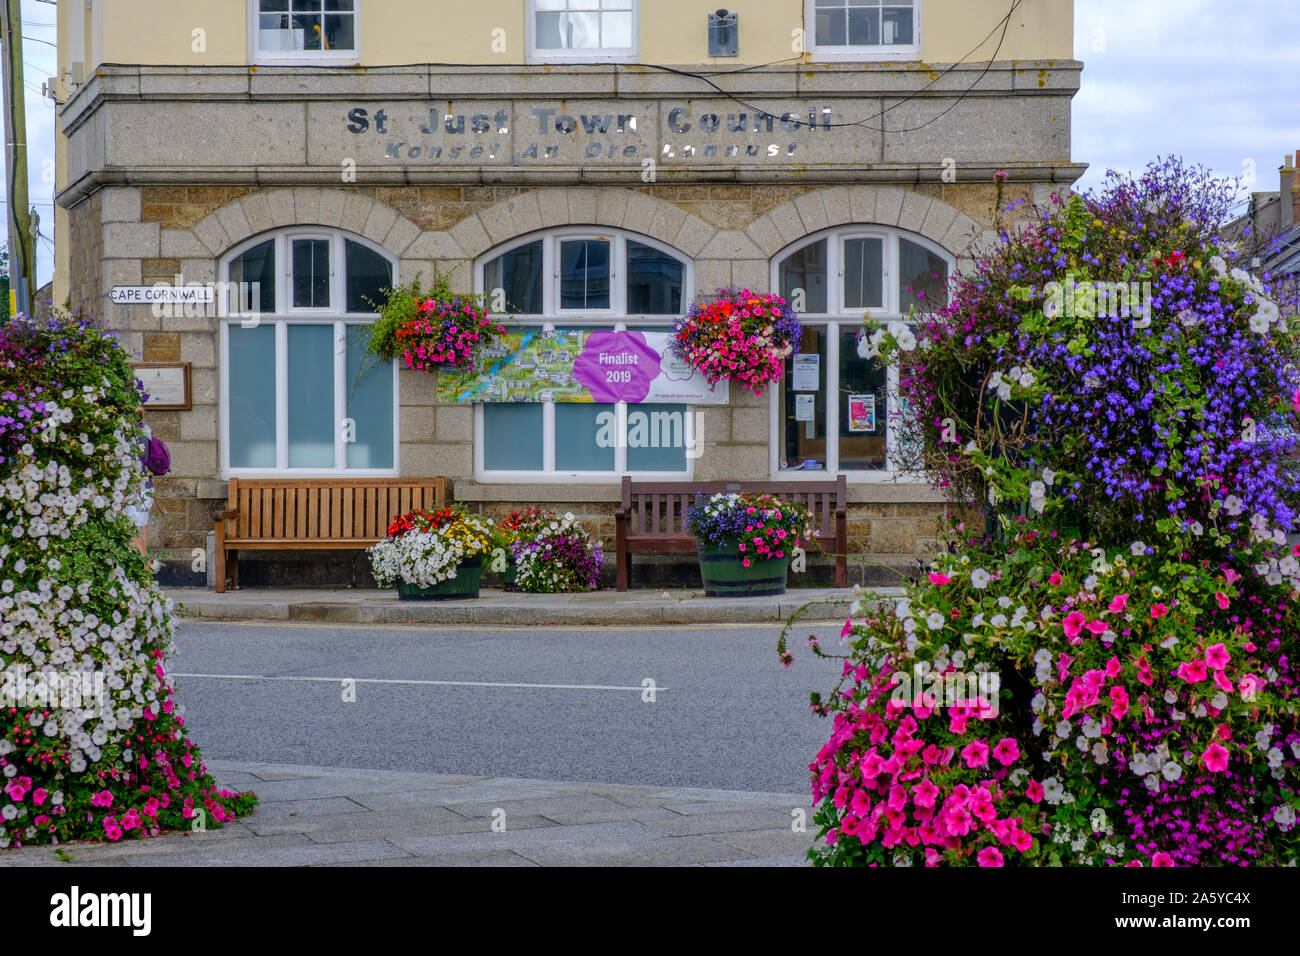 Town Hall St Just in Penwith Penzance Cornwall England Stock Photo